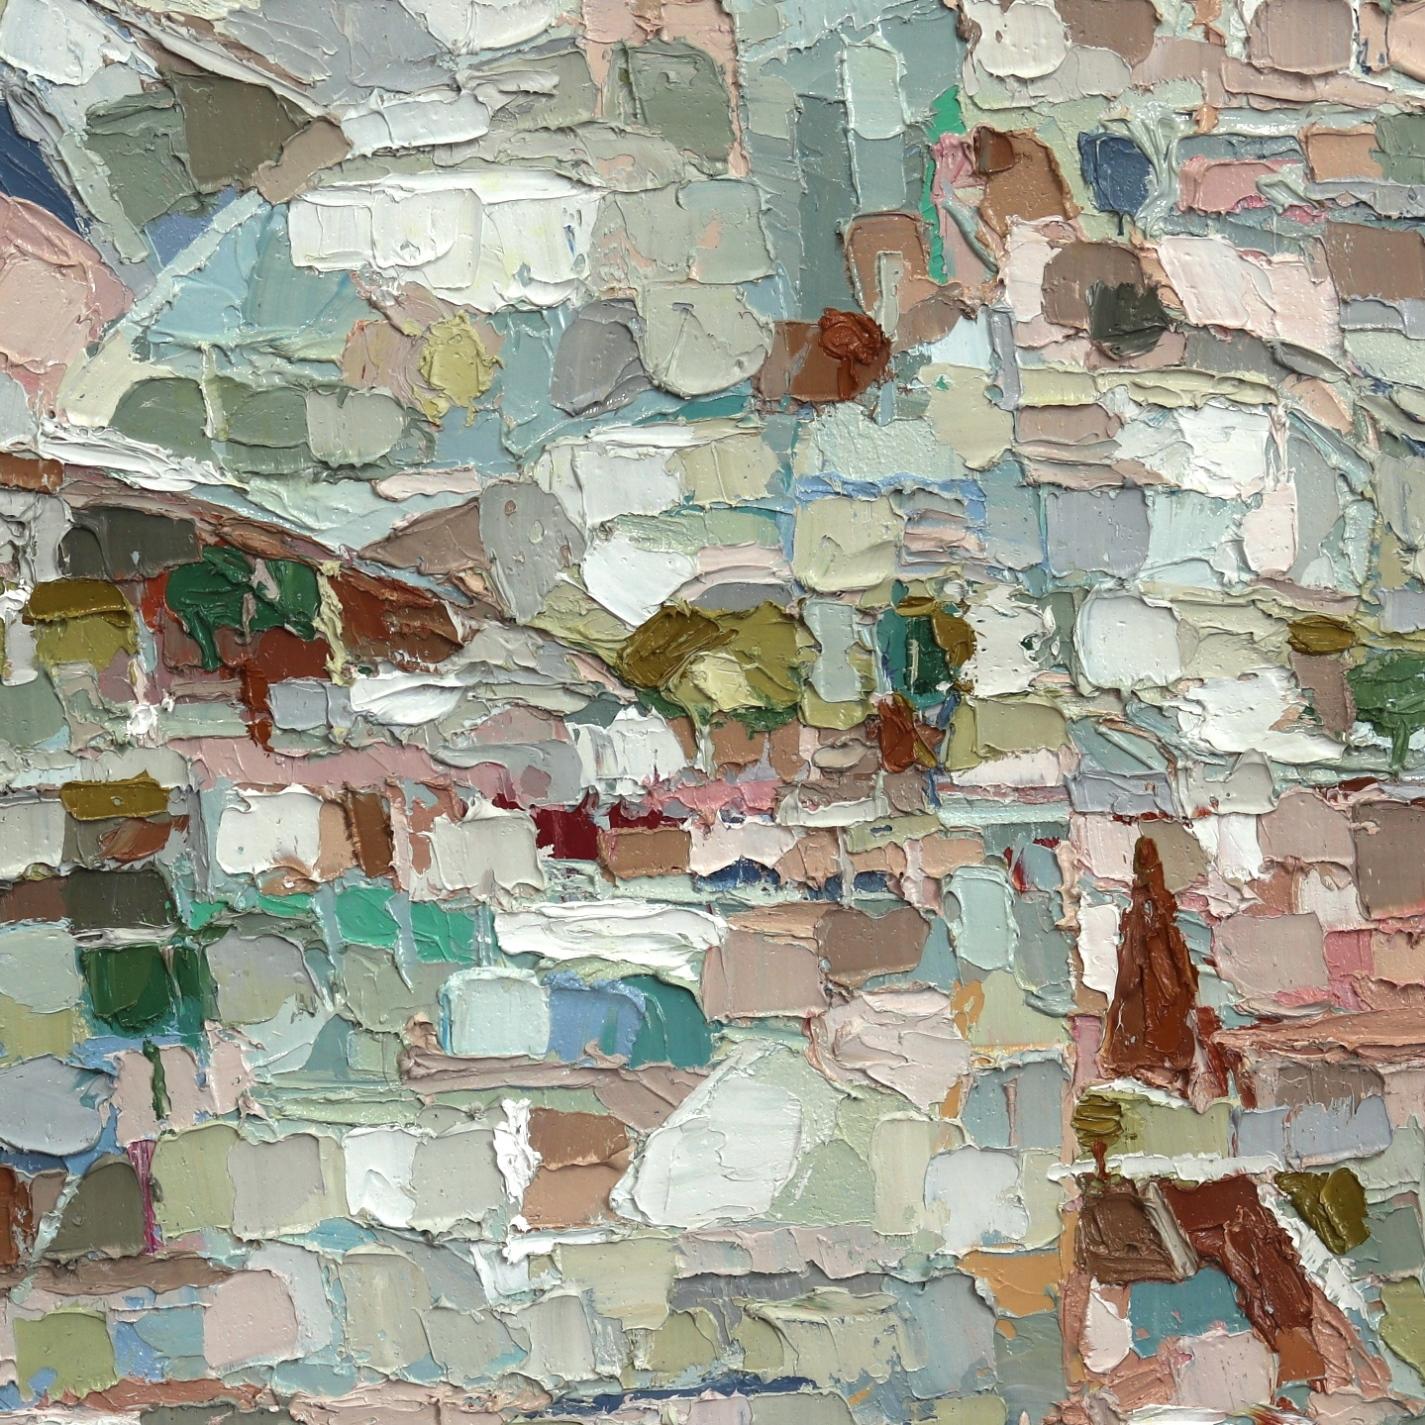 Facets - Original Textural Abstract Landscape Oil Painting 2